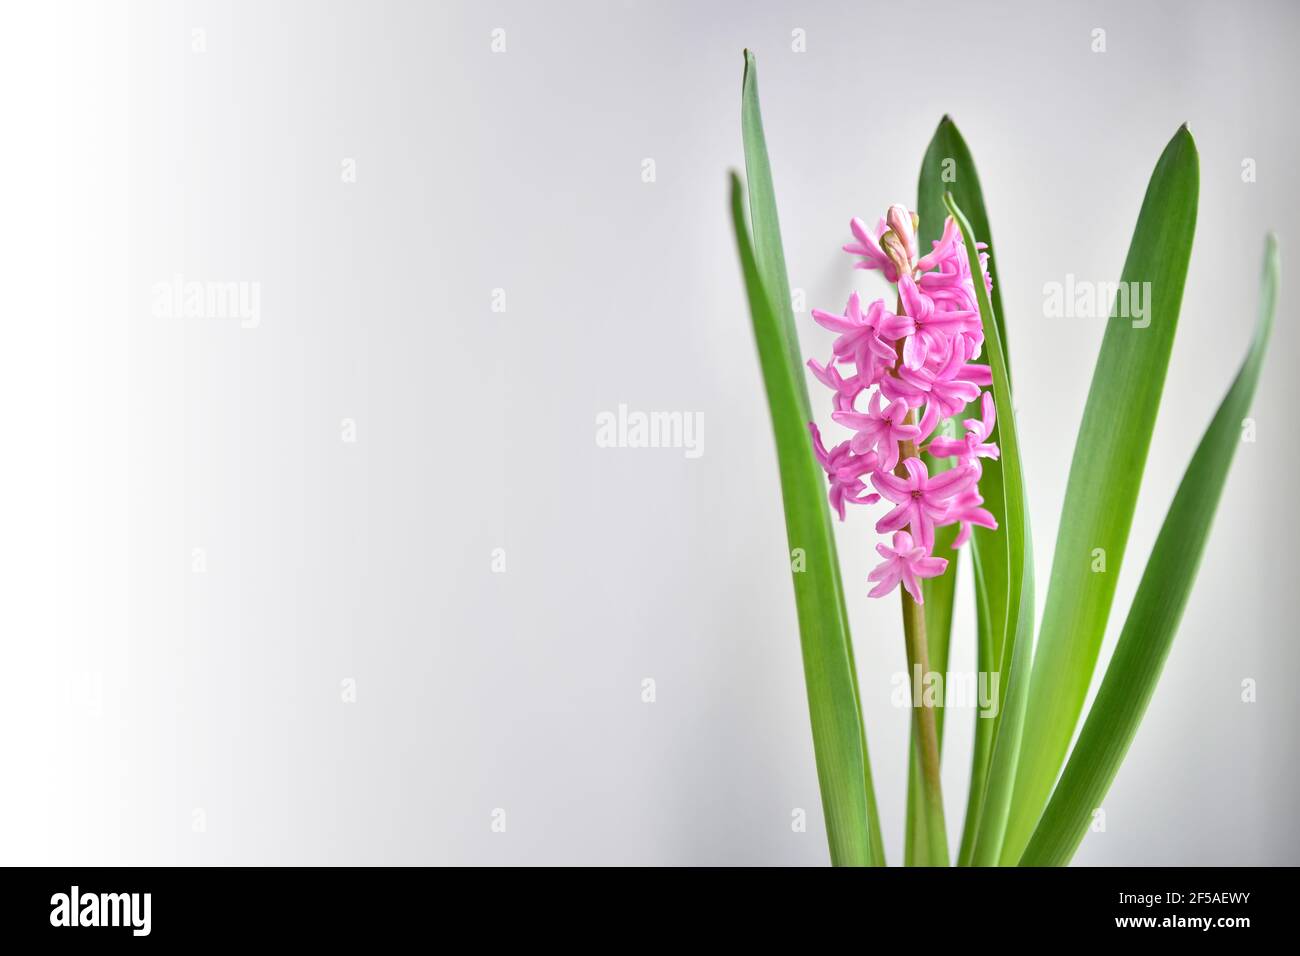 Bright pink hyacinth flower with leaves on a gray background Stock Photo